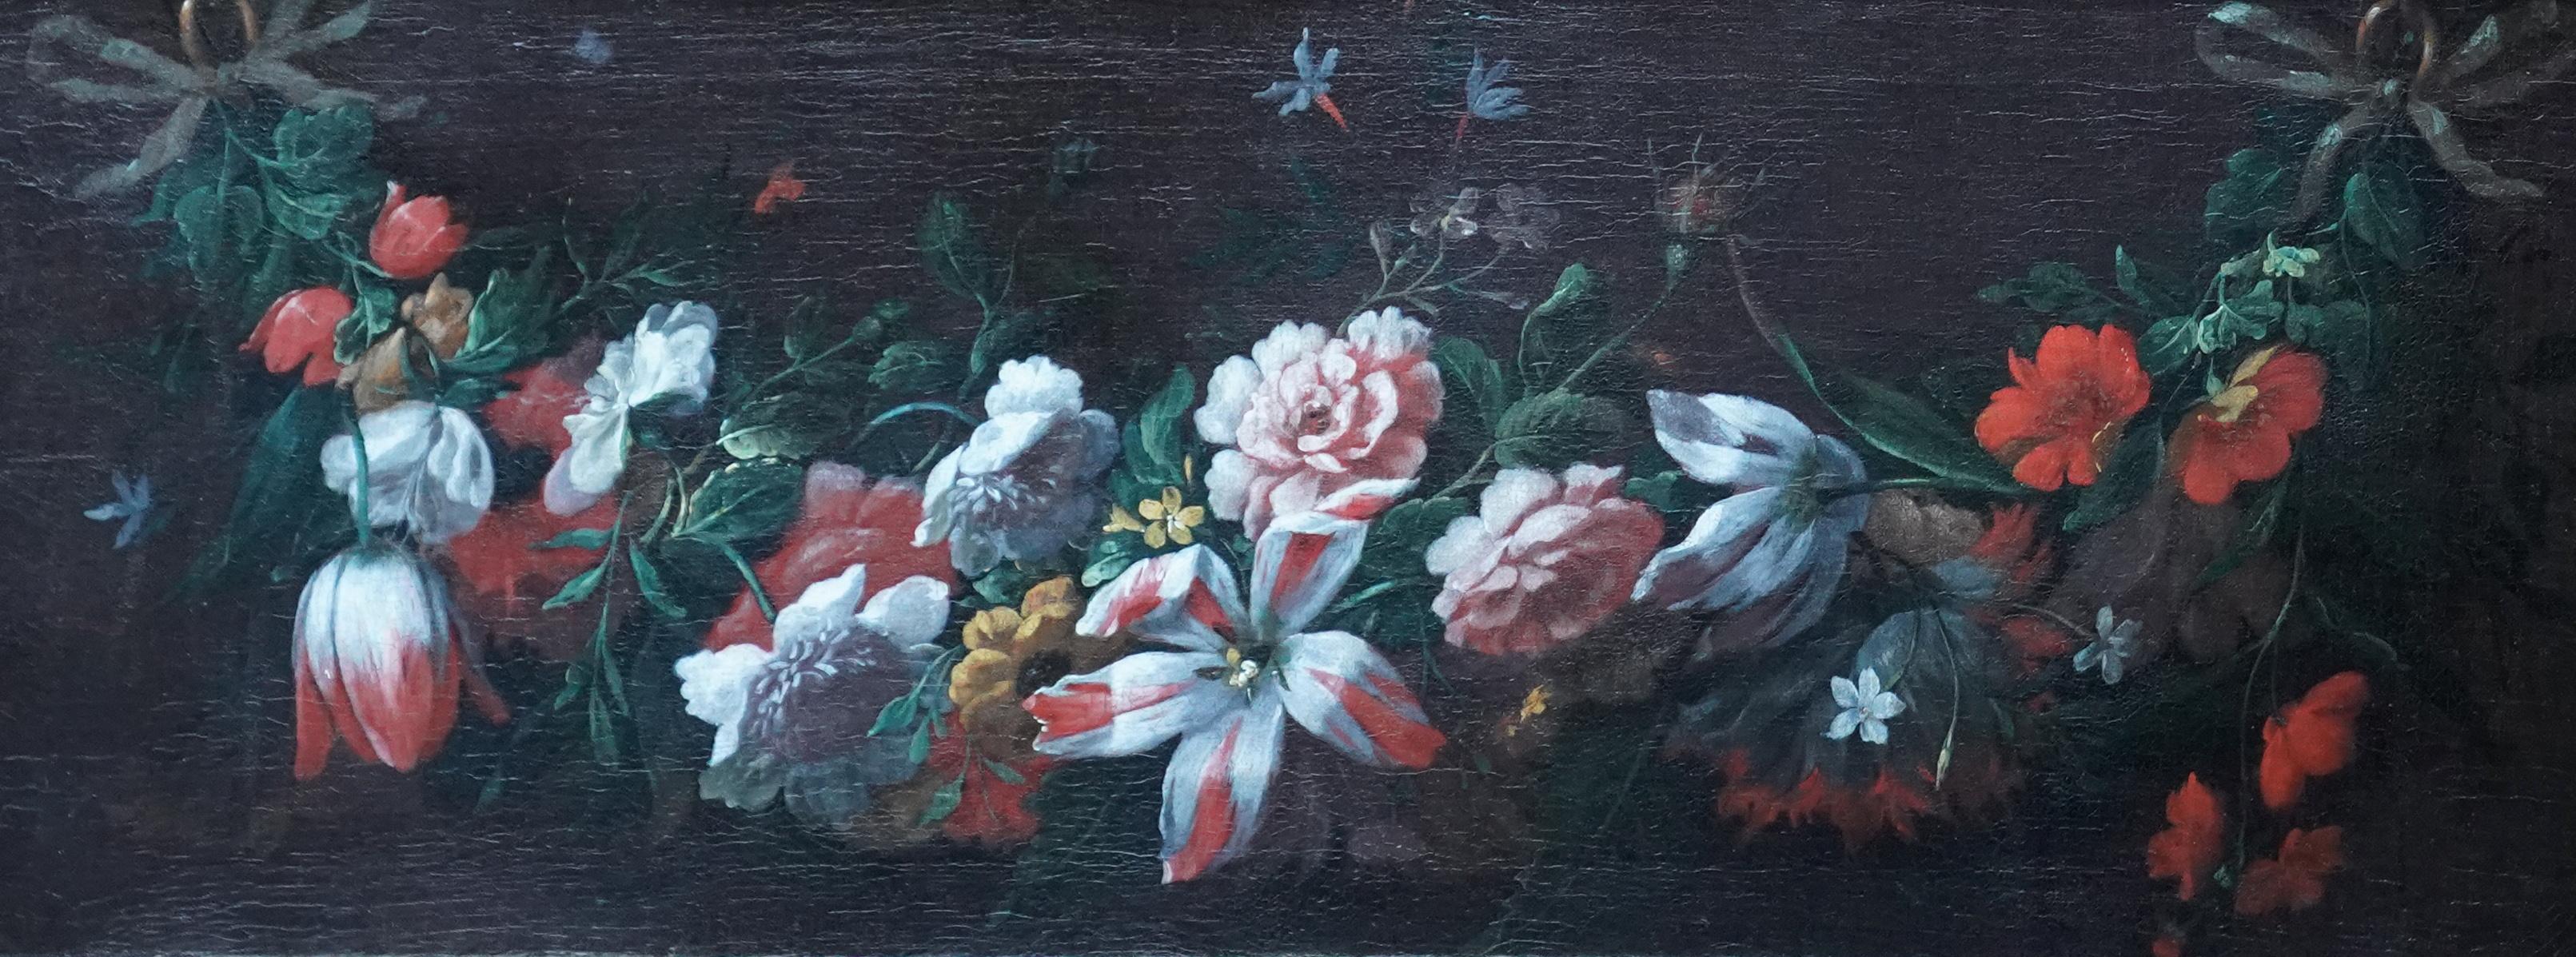 Still Life Garland of Flowers - Flemish 18thC art Old Master floral oil painting - Painting by Pieter Casteels III